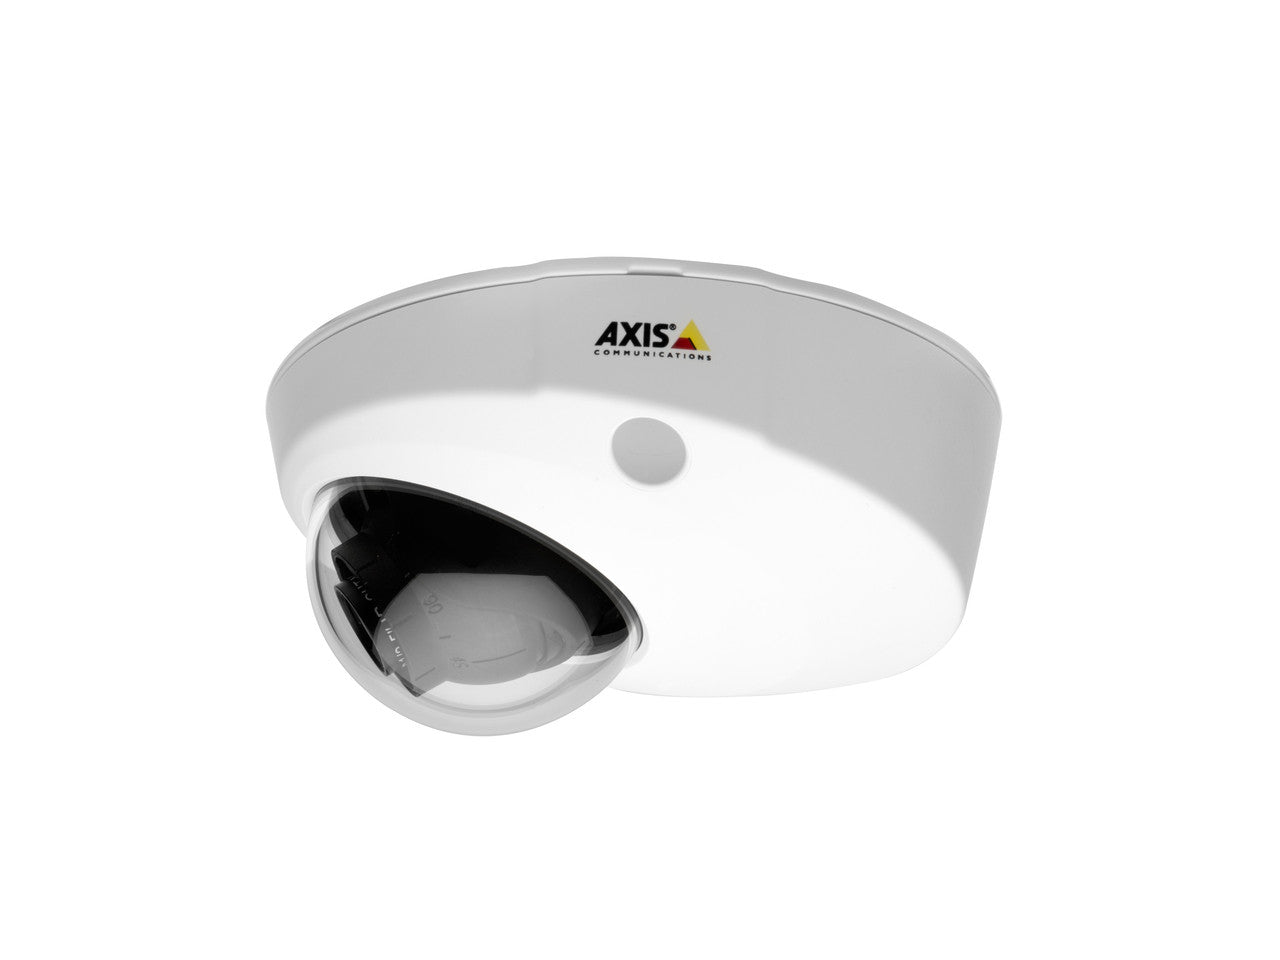 AXIS P3915-R